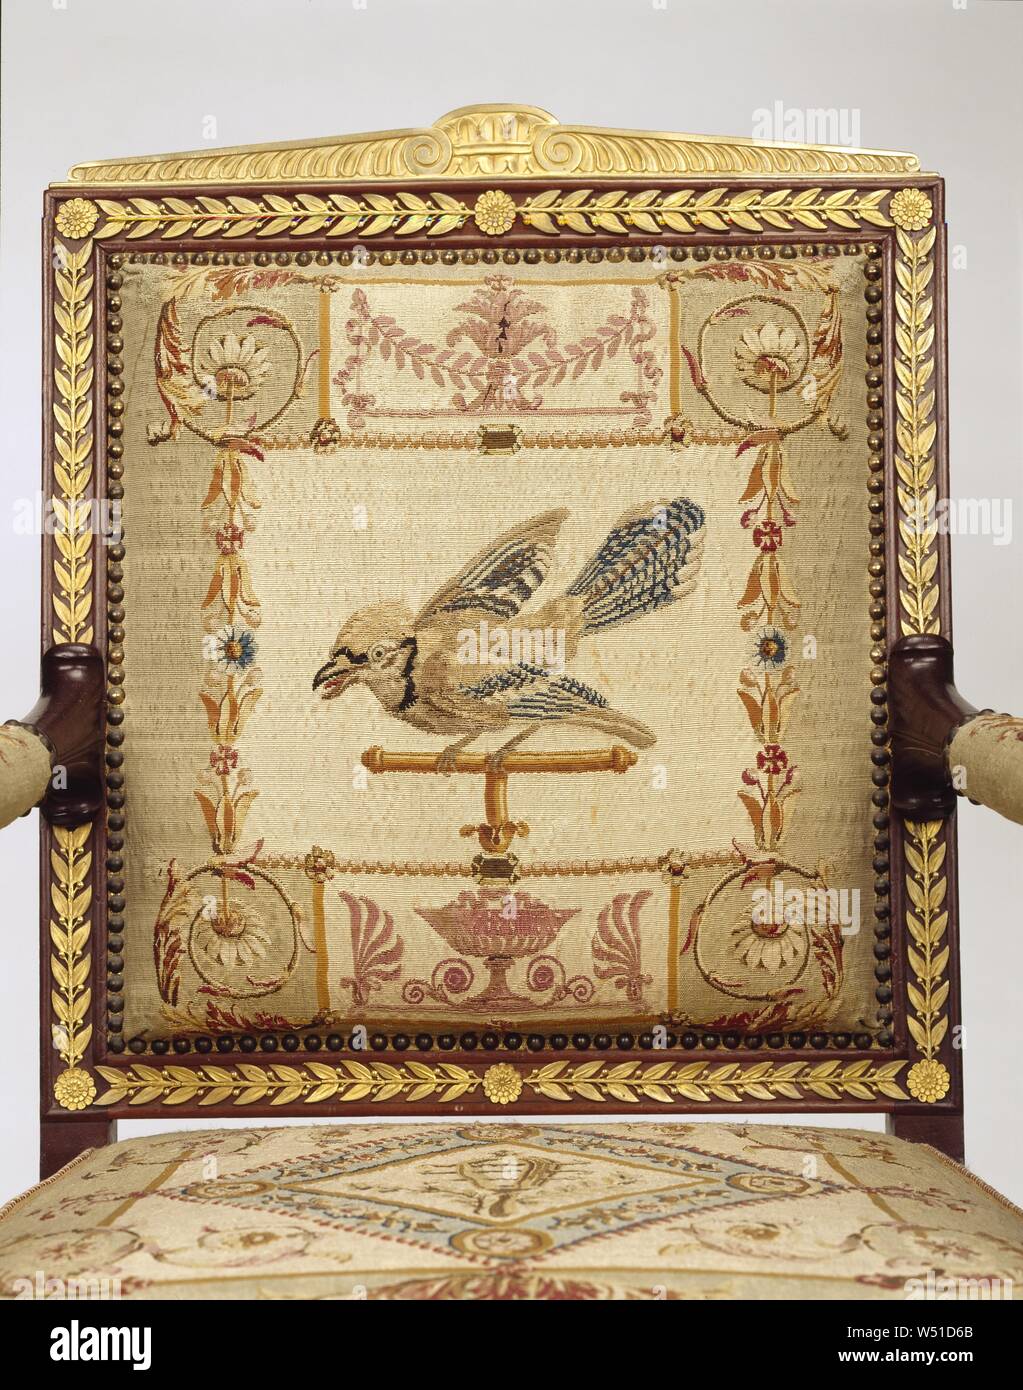 One Armchair, Frames attributed to François-Honoré-Georges Jacob-Desmalter (French, 1770 - 1841), Tapestry upholstery by the Beauvais Manufactory (French, founded 1664), Beauvais, France, about 1810, Mahogany and beech, gilt-bronze mounts, wool and silk, 100.6 × 63.5 × 50.8 cm (39 5/8 × 25 × 20 in Stock Photo